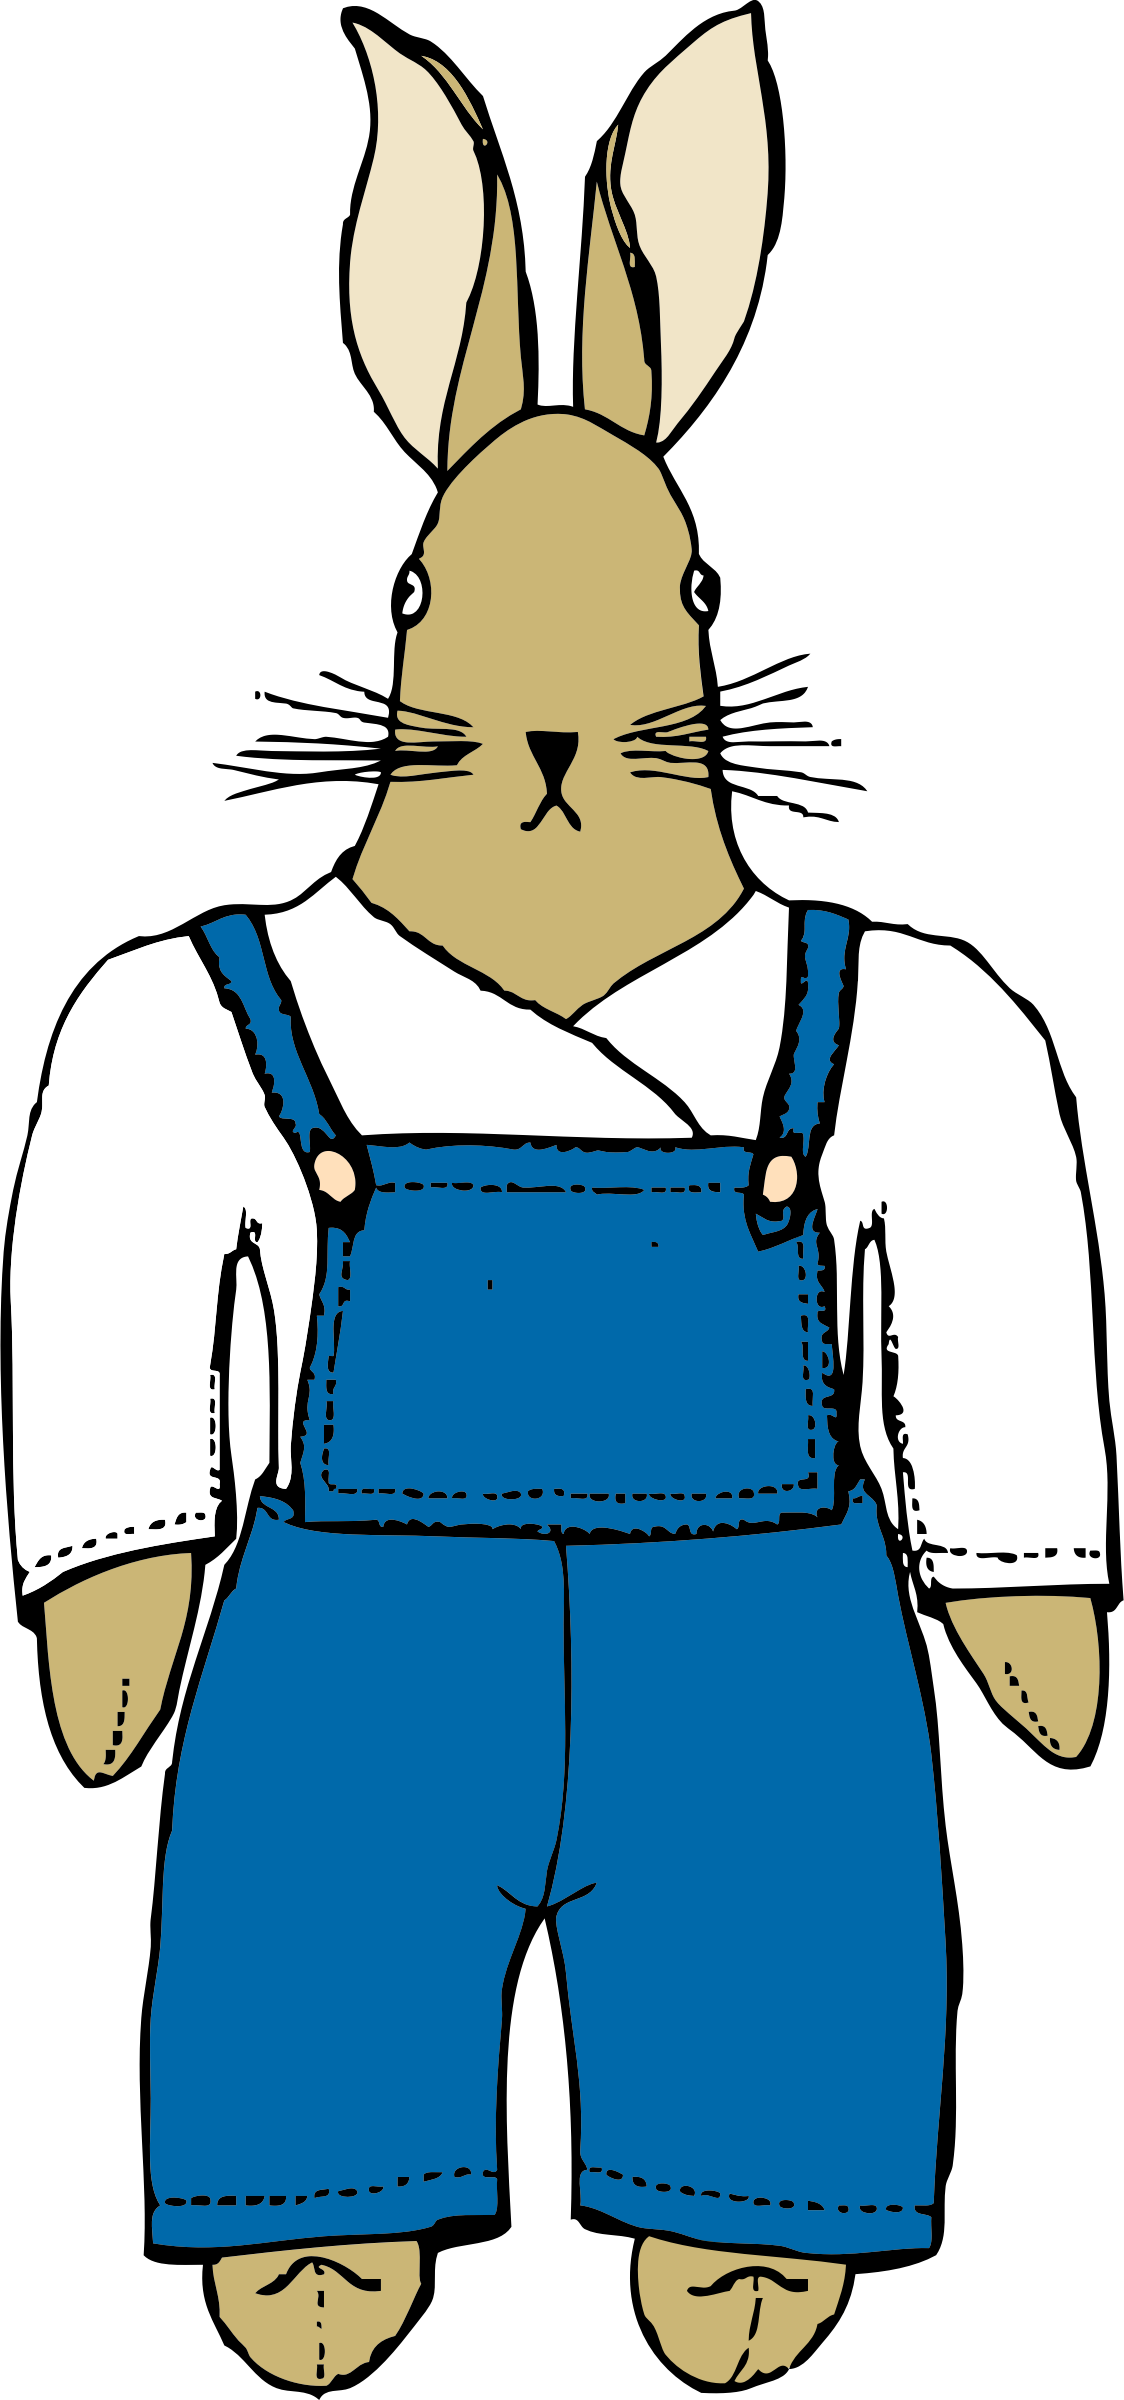 Free Bunny In Overalls Front View - Overall Clip Art (640x1280)